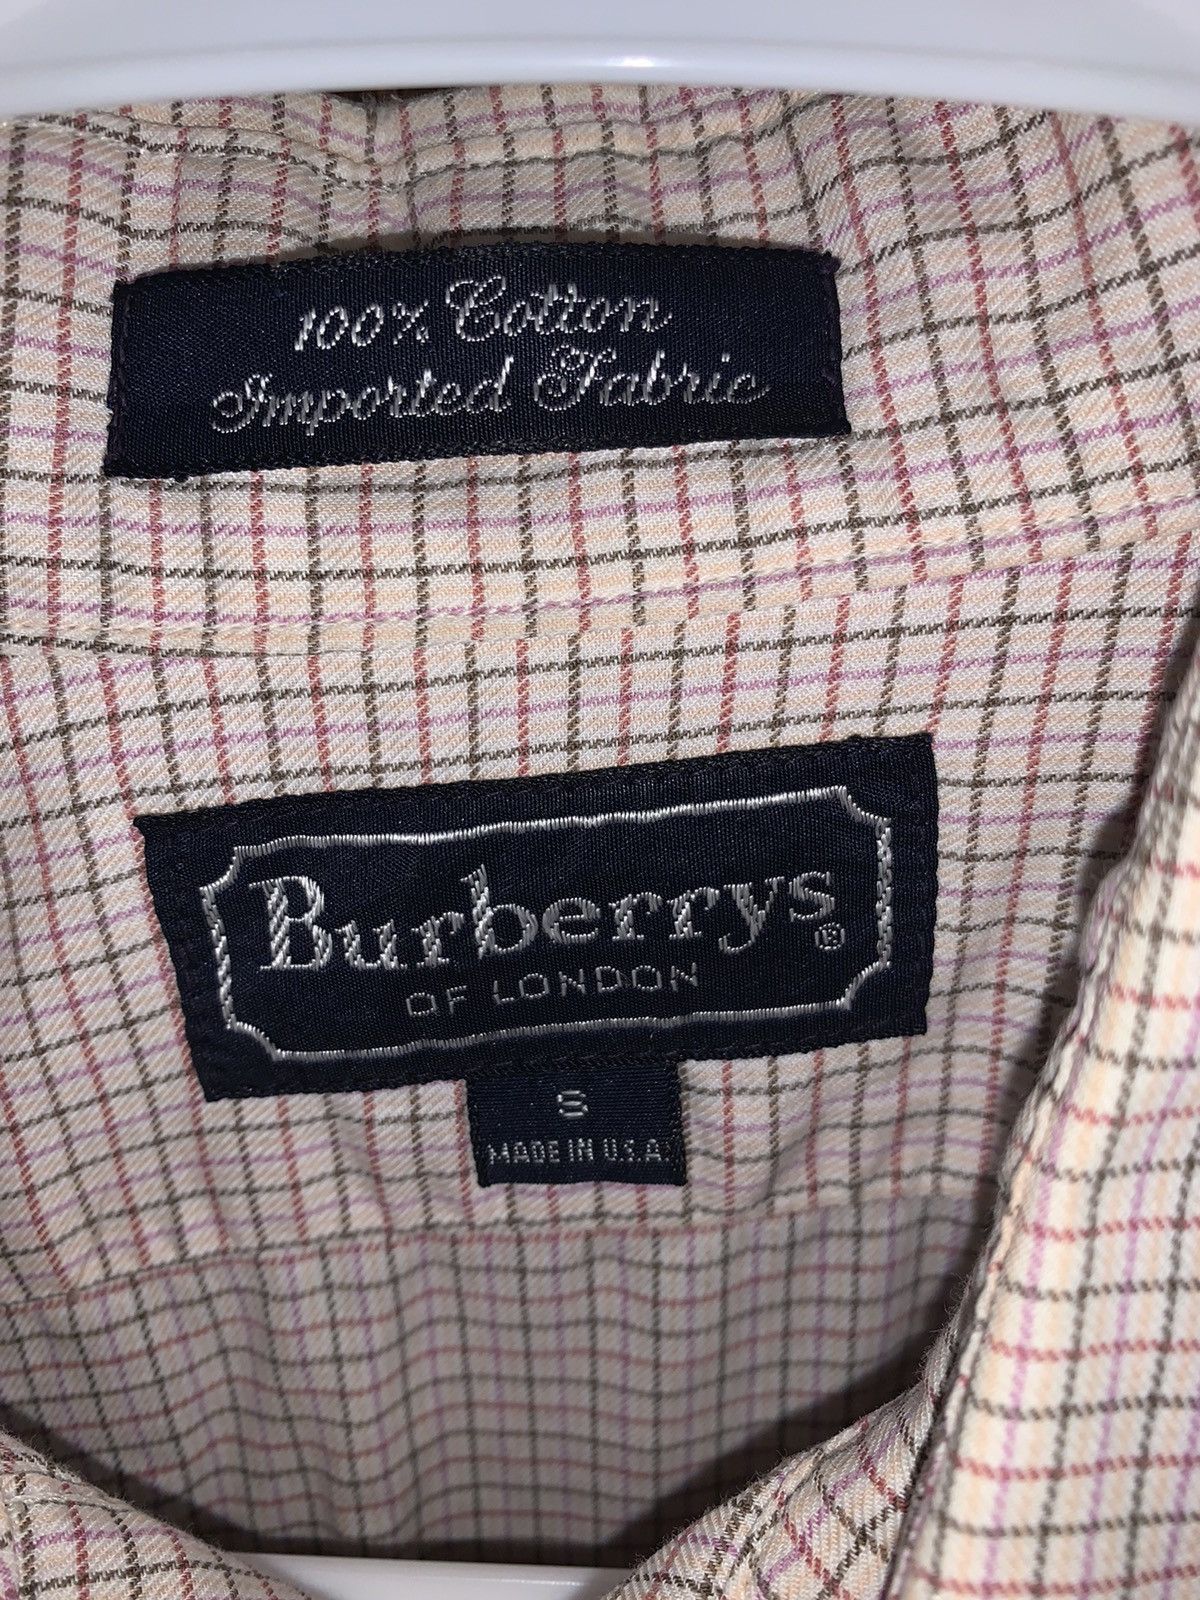 Burberry Burberry long sleeve button up Size US S / EU 44-46 / 1 - 2 Preview